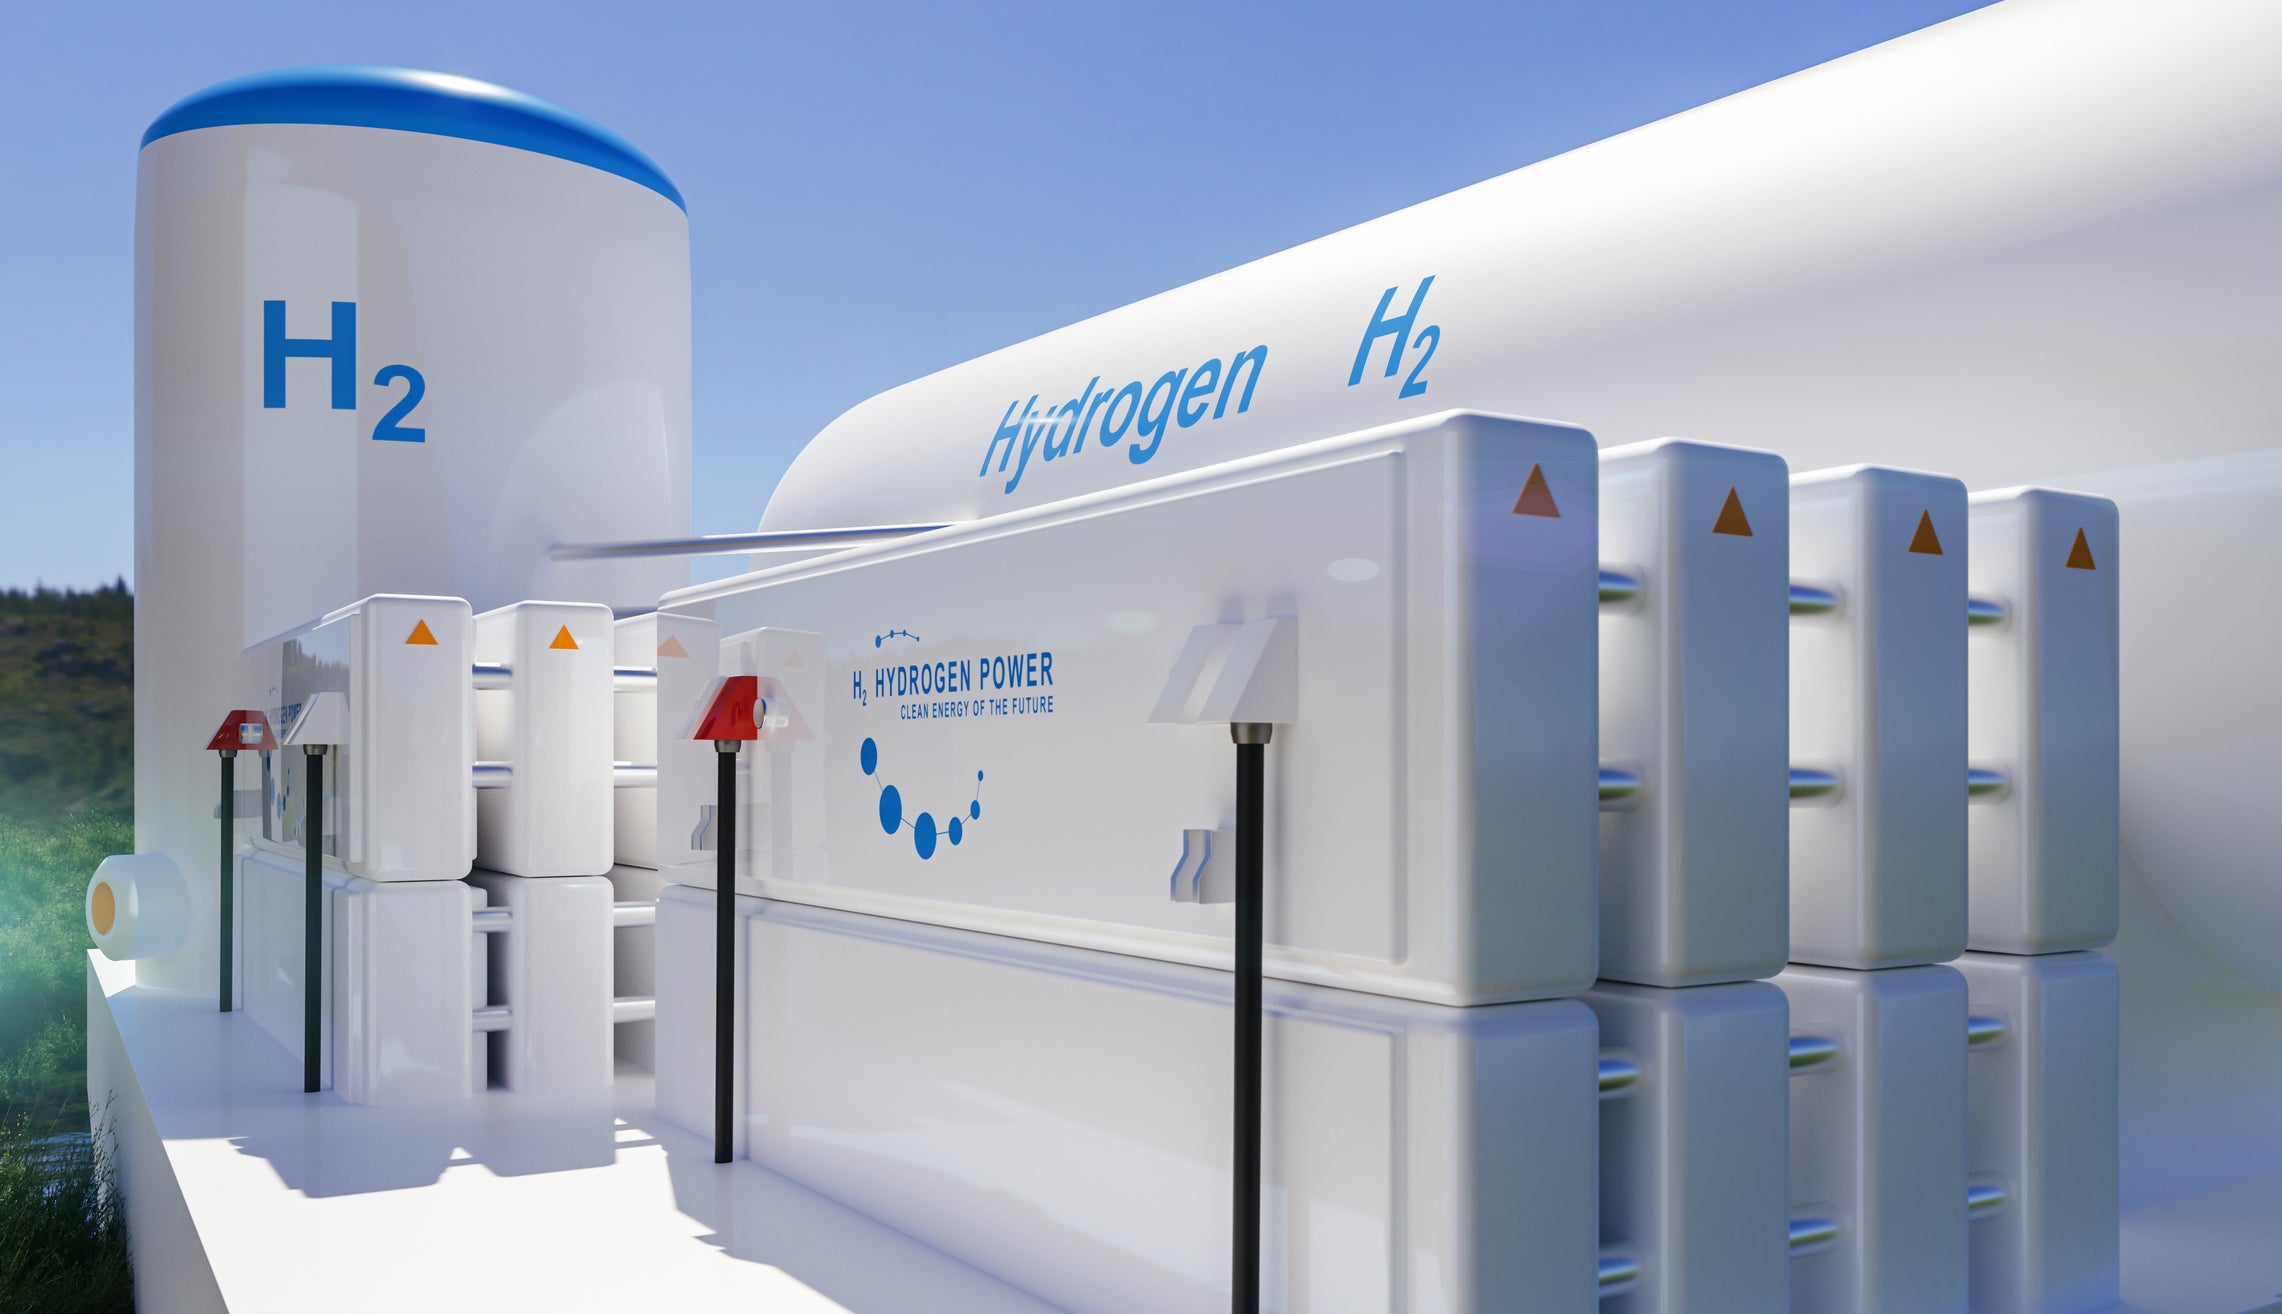 Siemens signs agreement to produce green hydrogen in Egypt